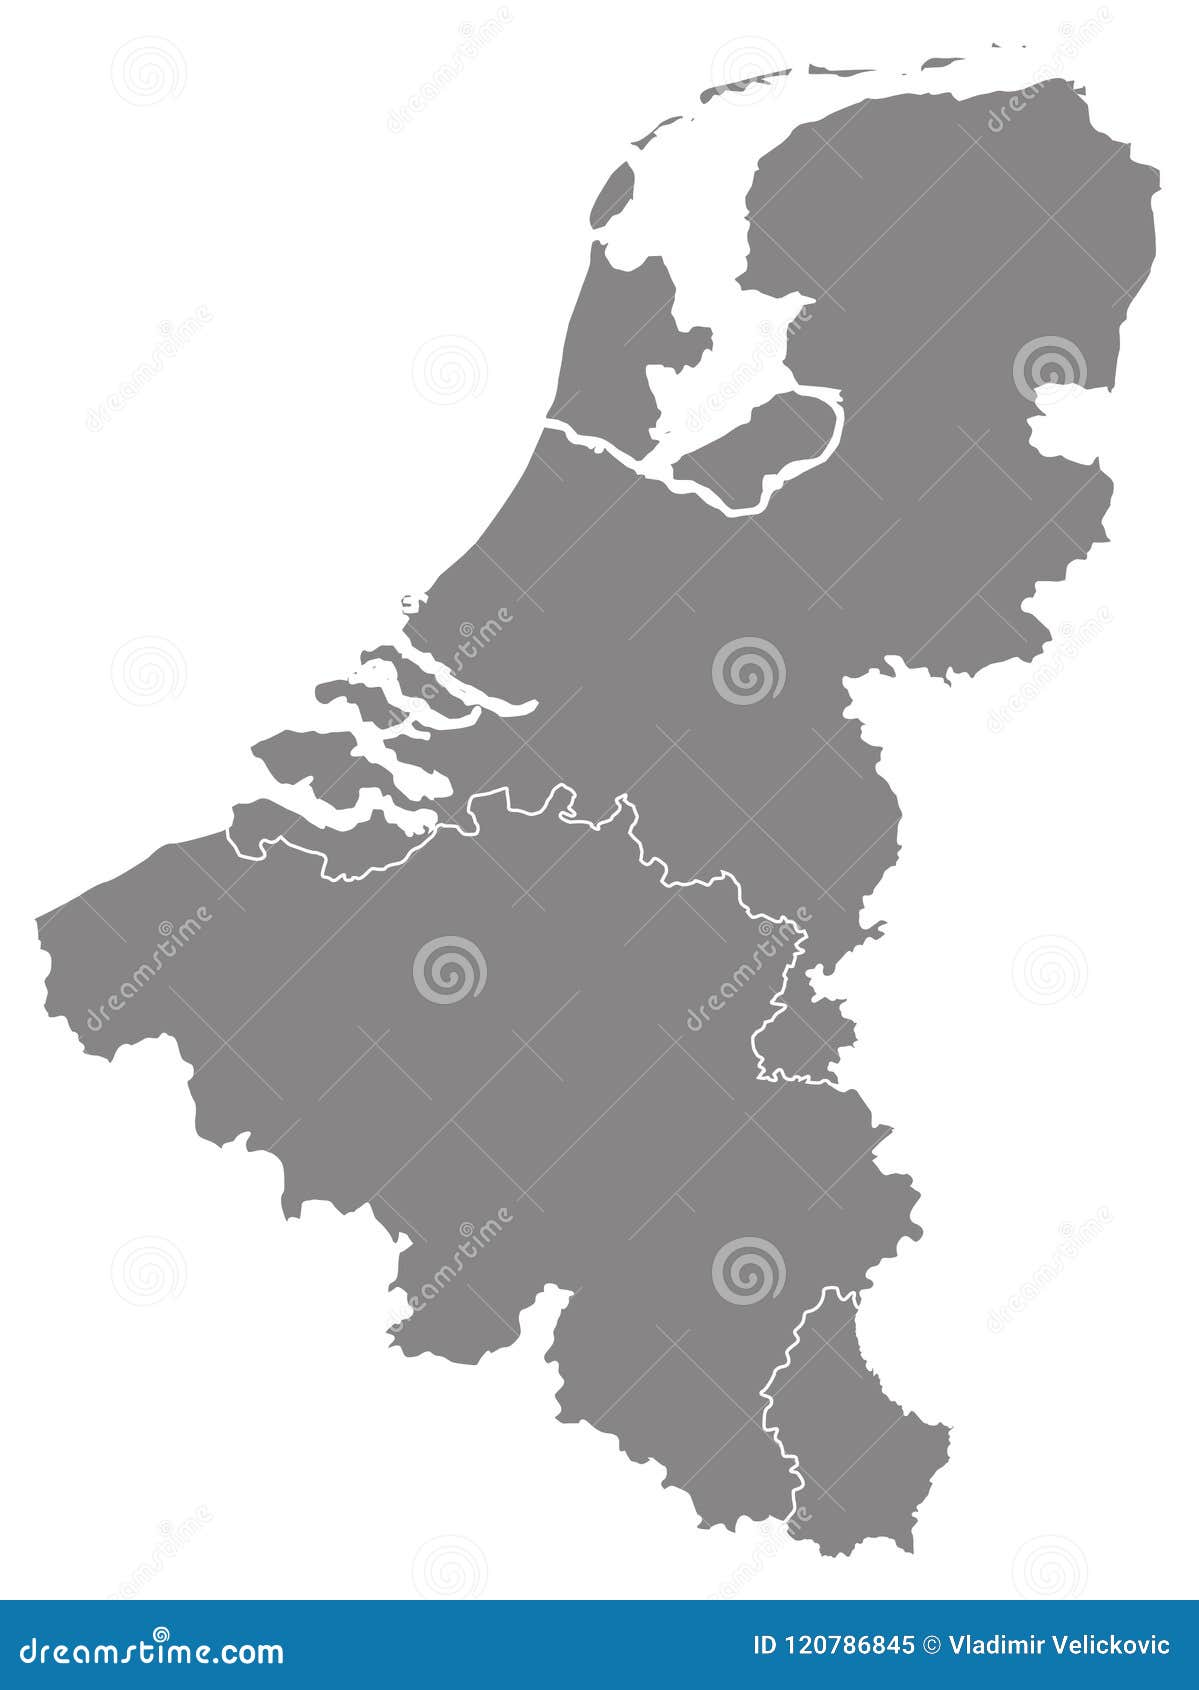 benelux map - three states in western europe: belgium, the netherlands, and luxembourg